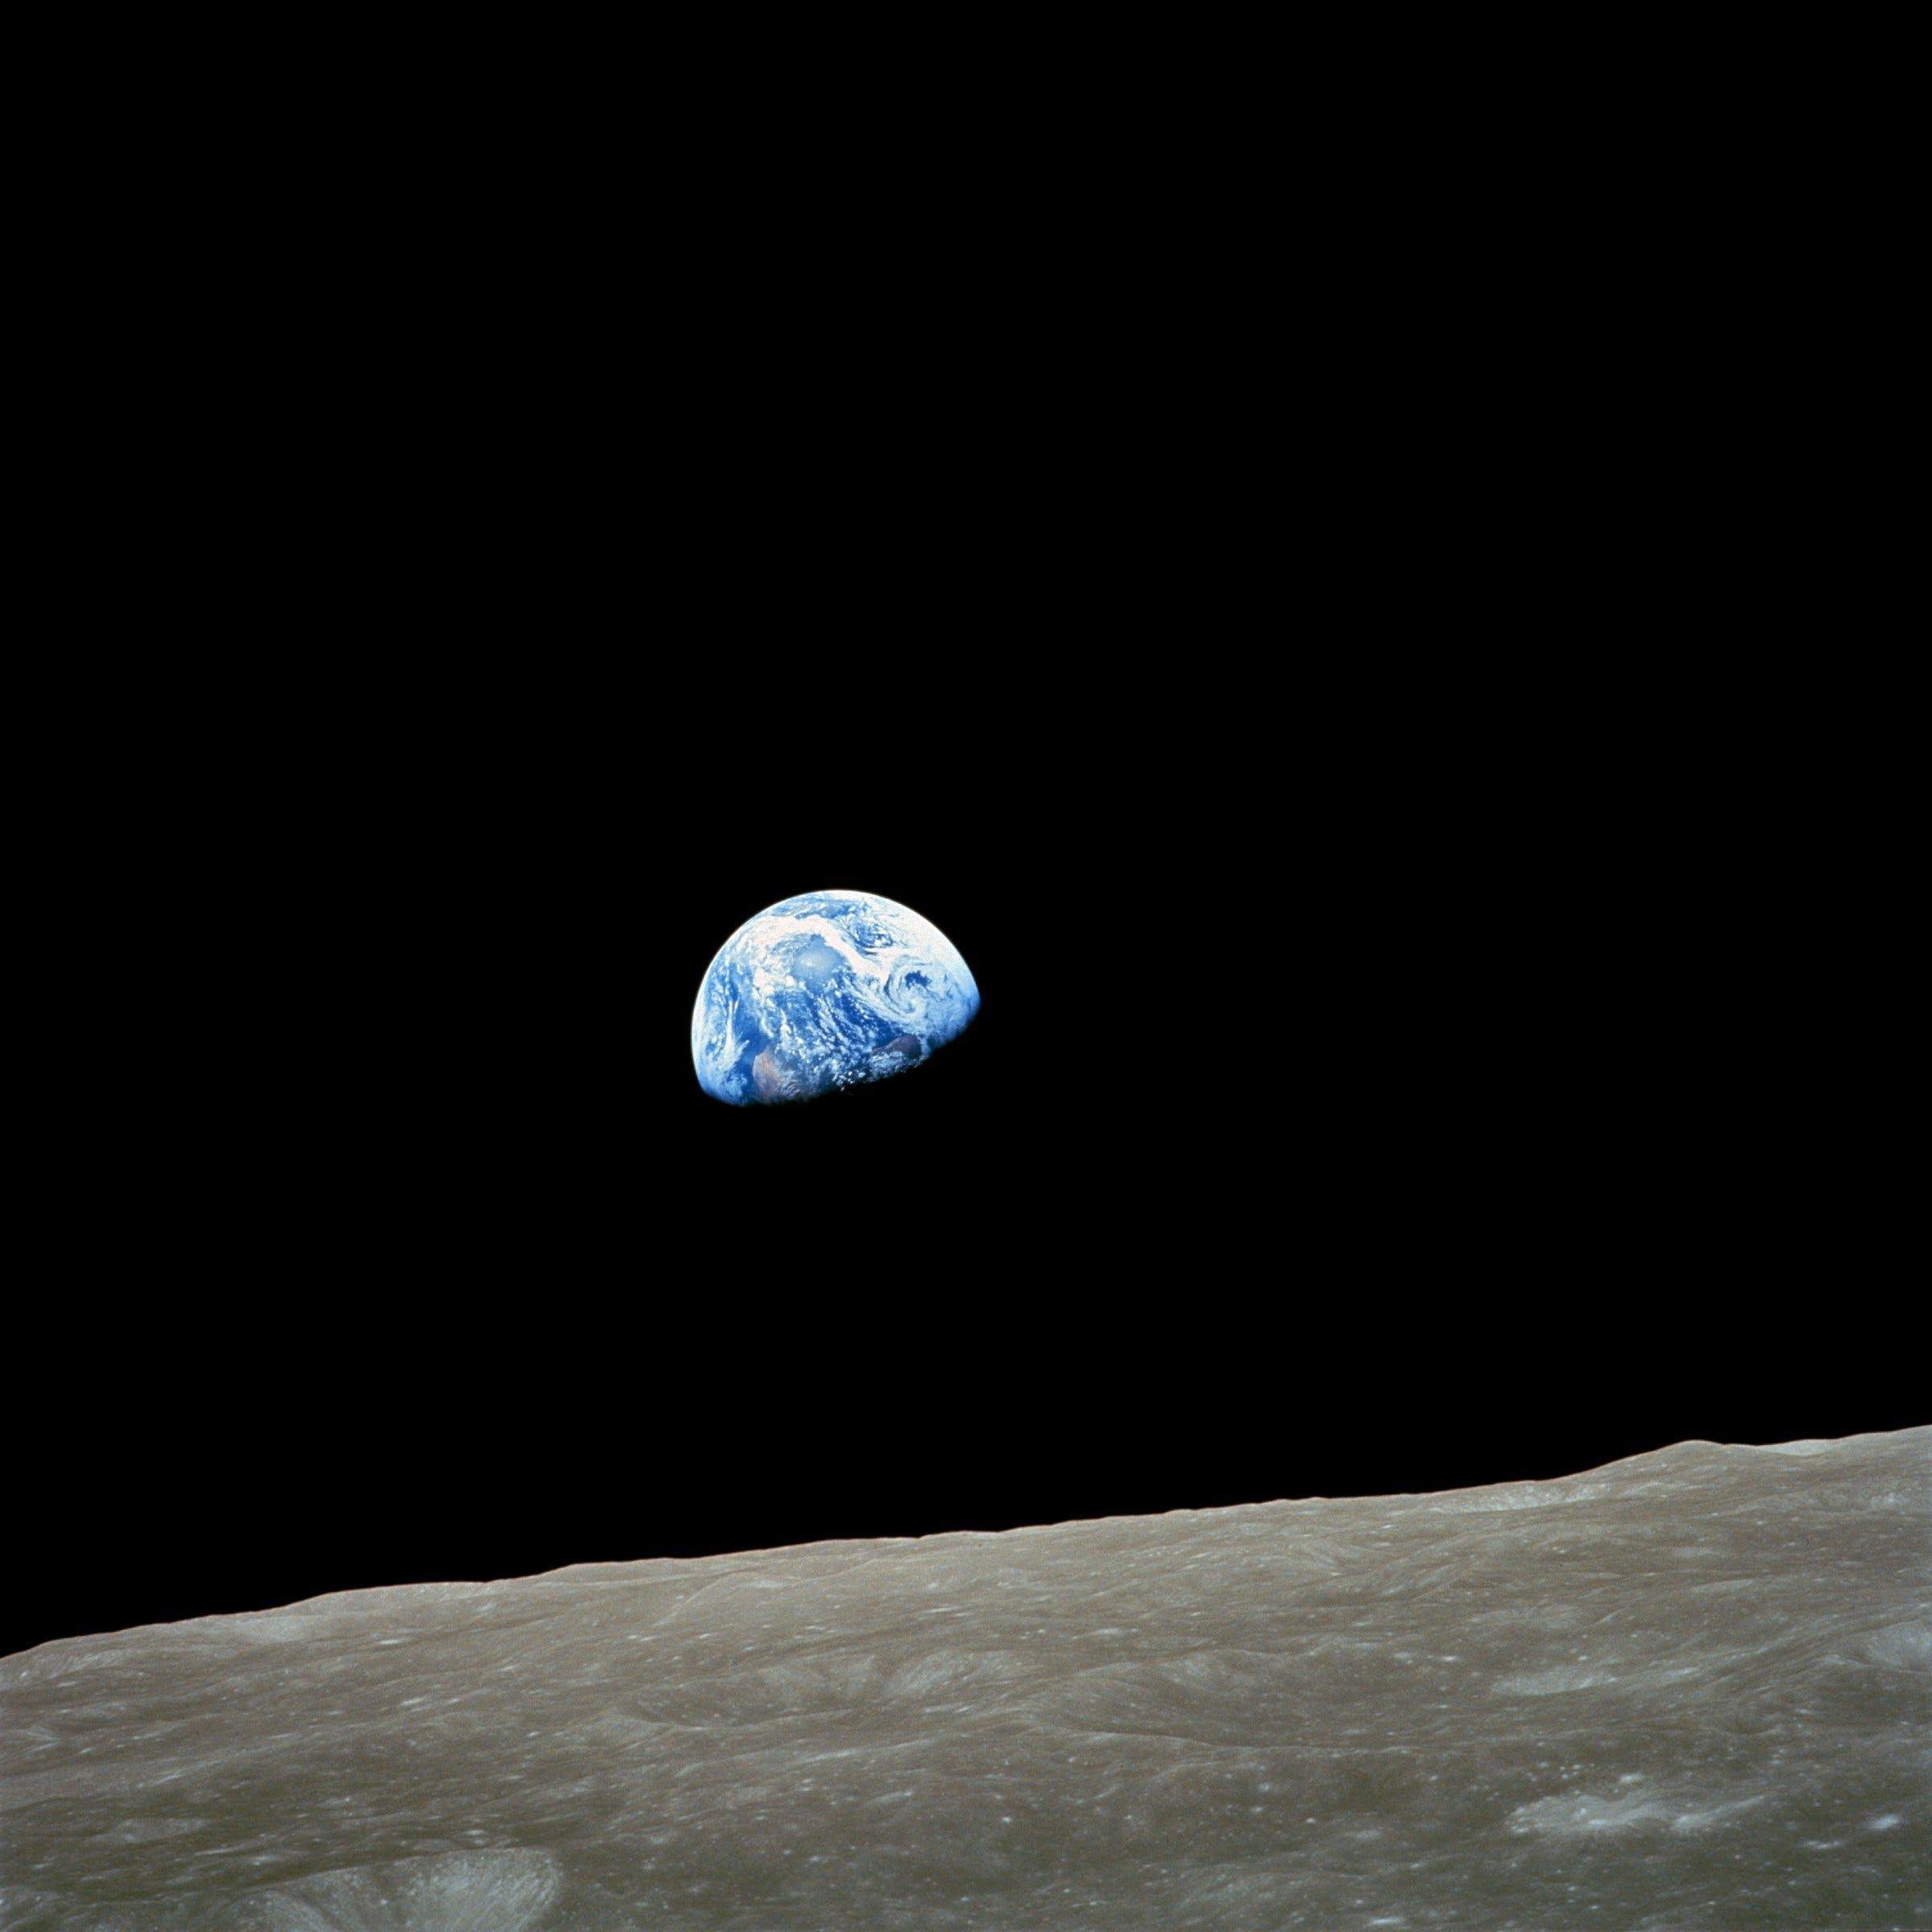 Picture of earth from the moon.